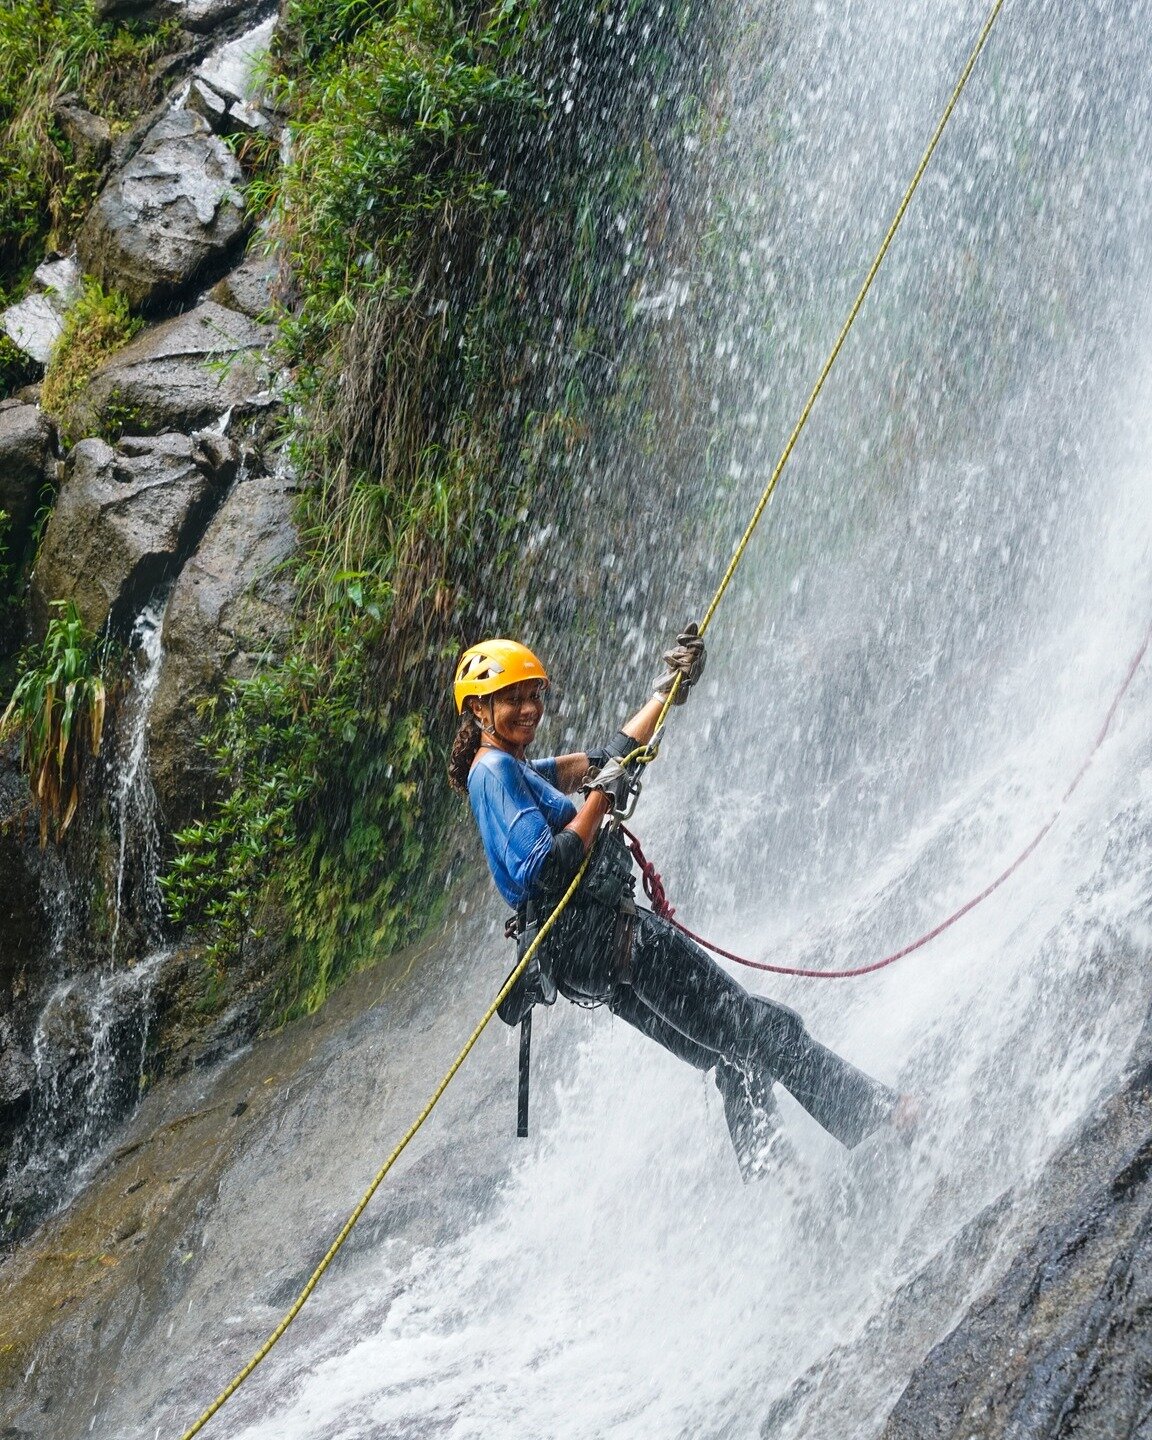 Who's up for a splash-tastic adventure? 🌊🤩 
At Bocawina Rainforest Resort, we're taking family fun to new heights with waterfall rappelling! Laugh, scream, and make a splash as you descend through a tropical paradise. Are you brave enough to join t